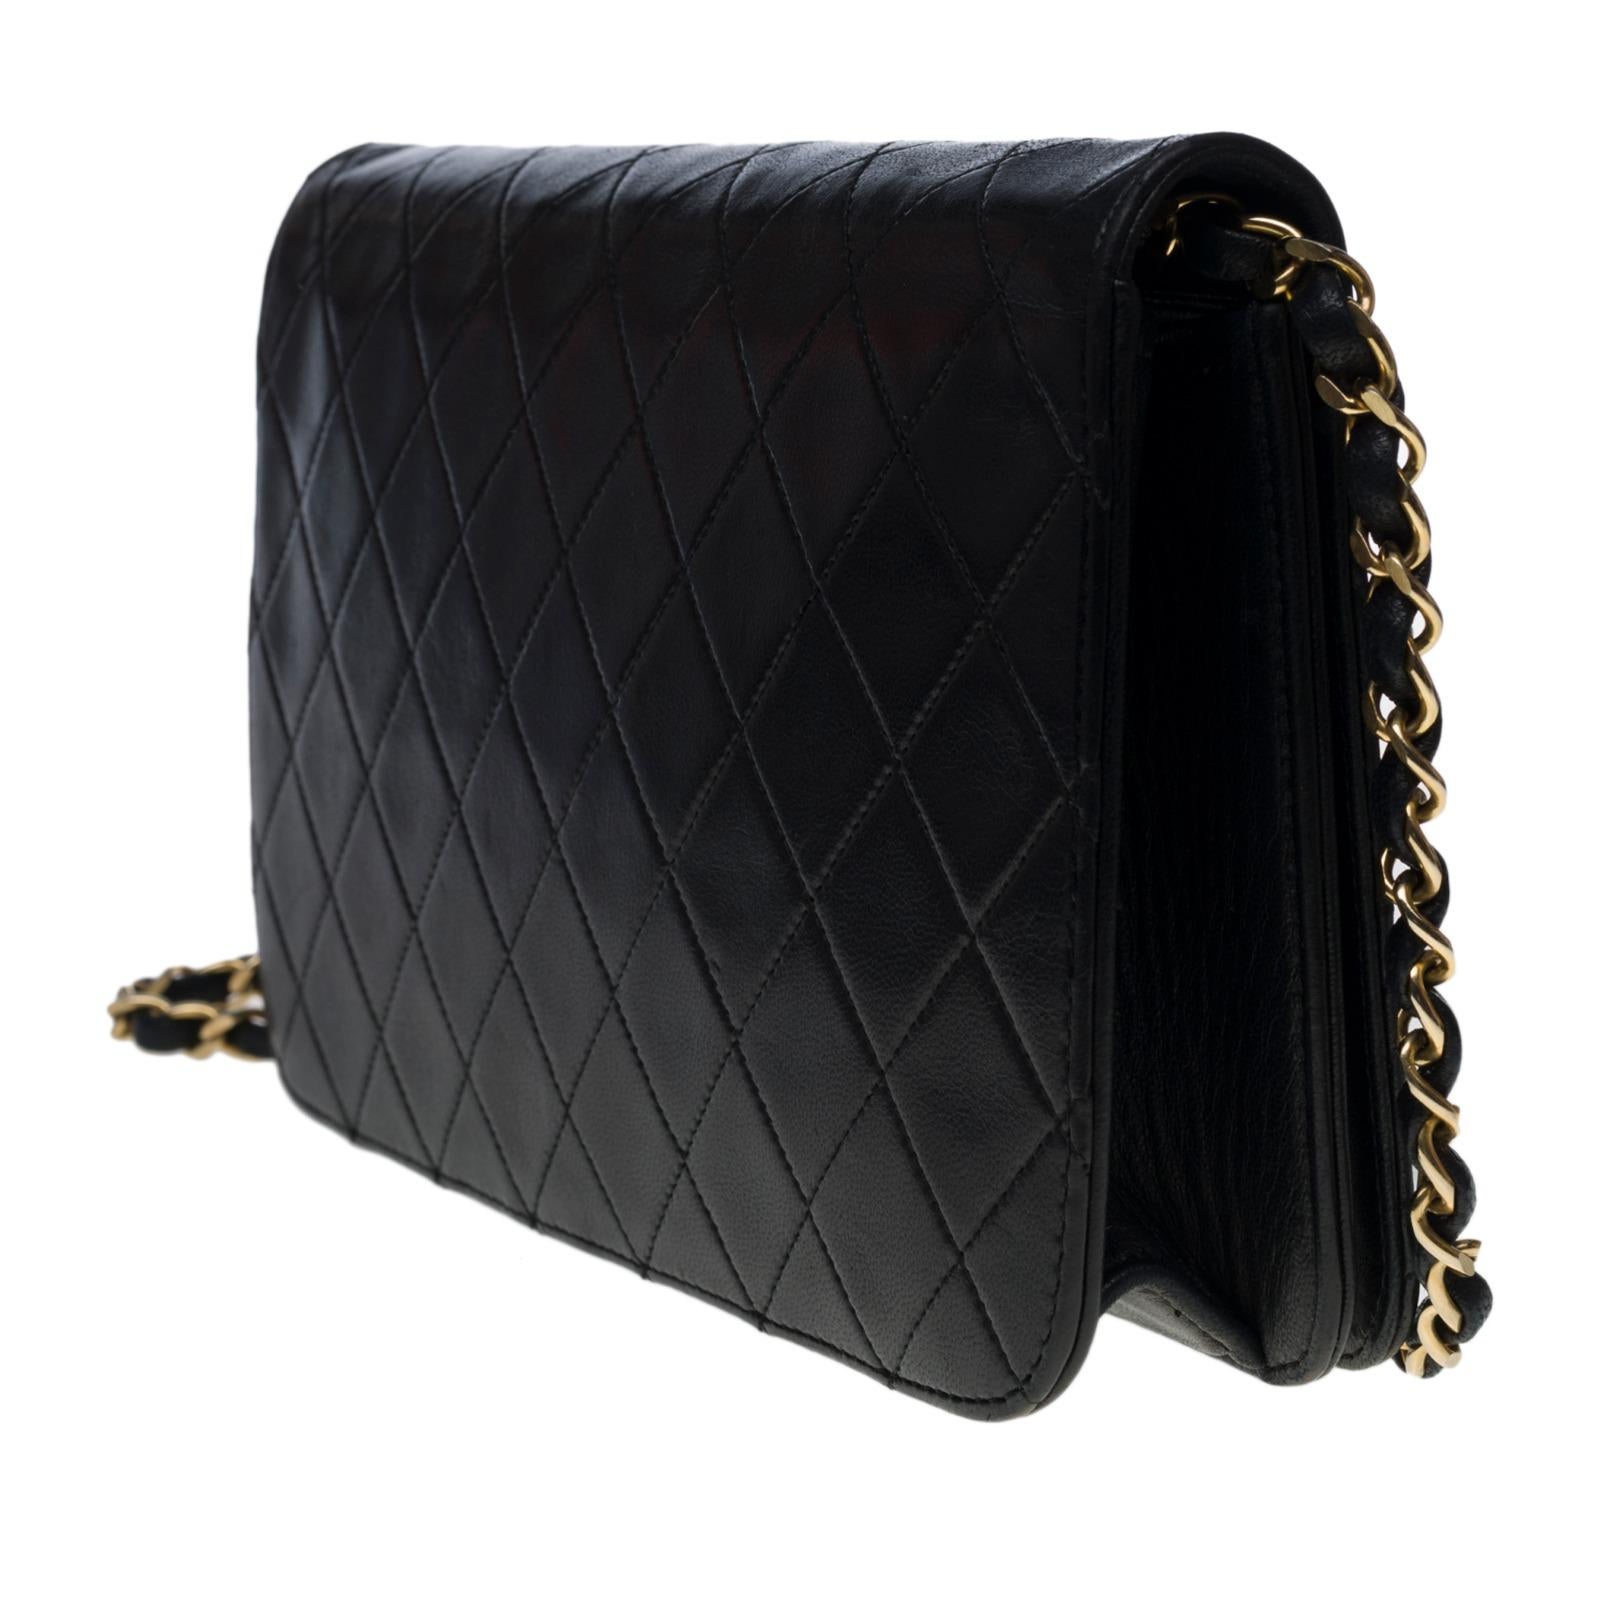 Women's Chanel Classic Full Flap shoulder bag in black quilted lambskin leather, GHW